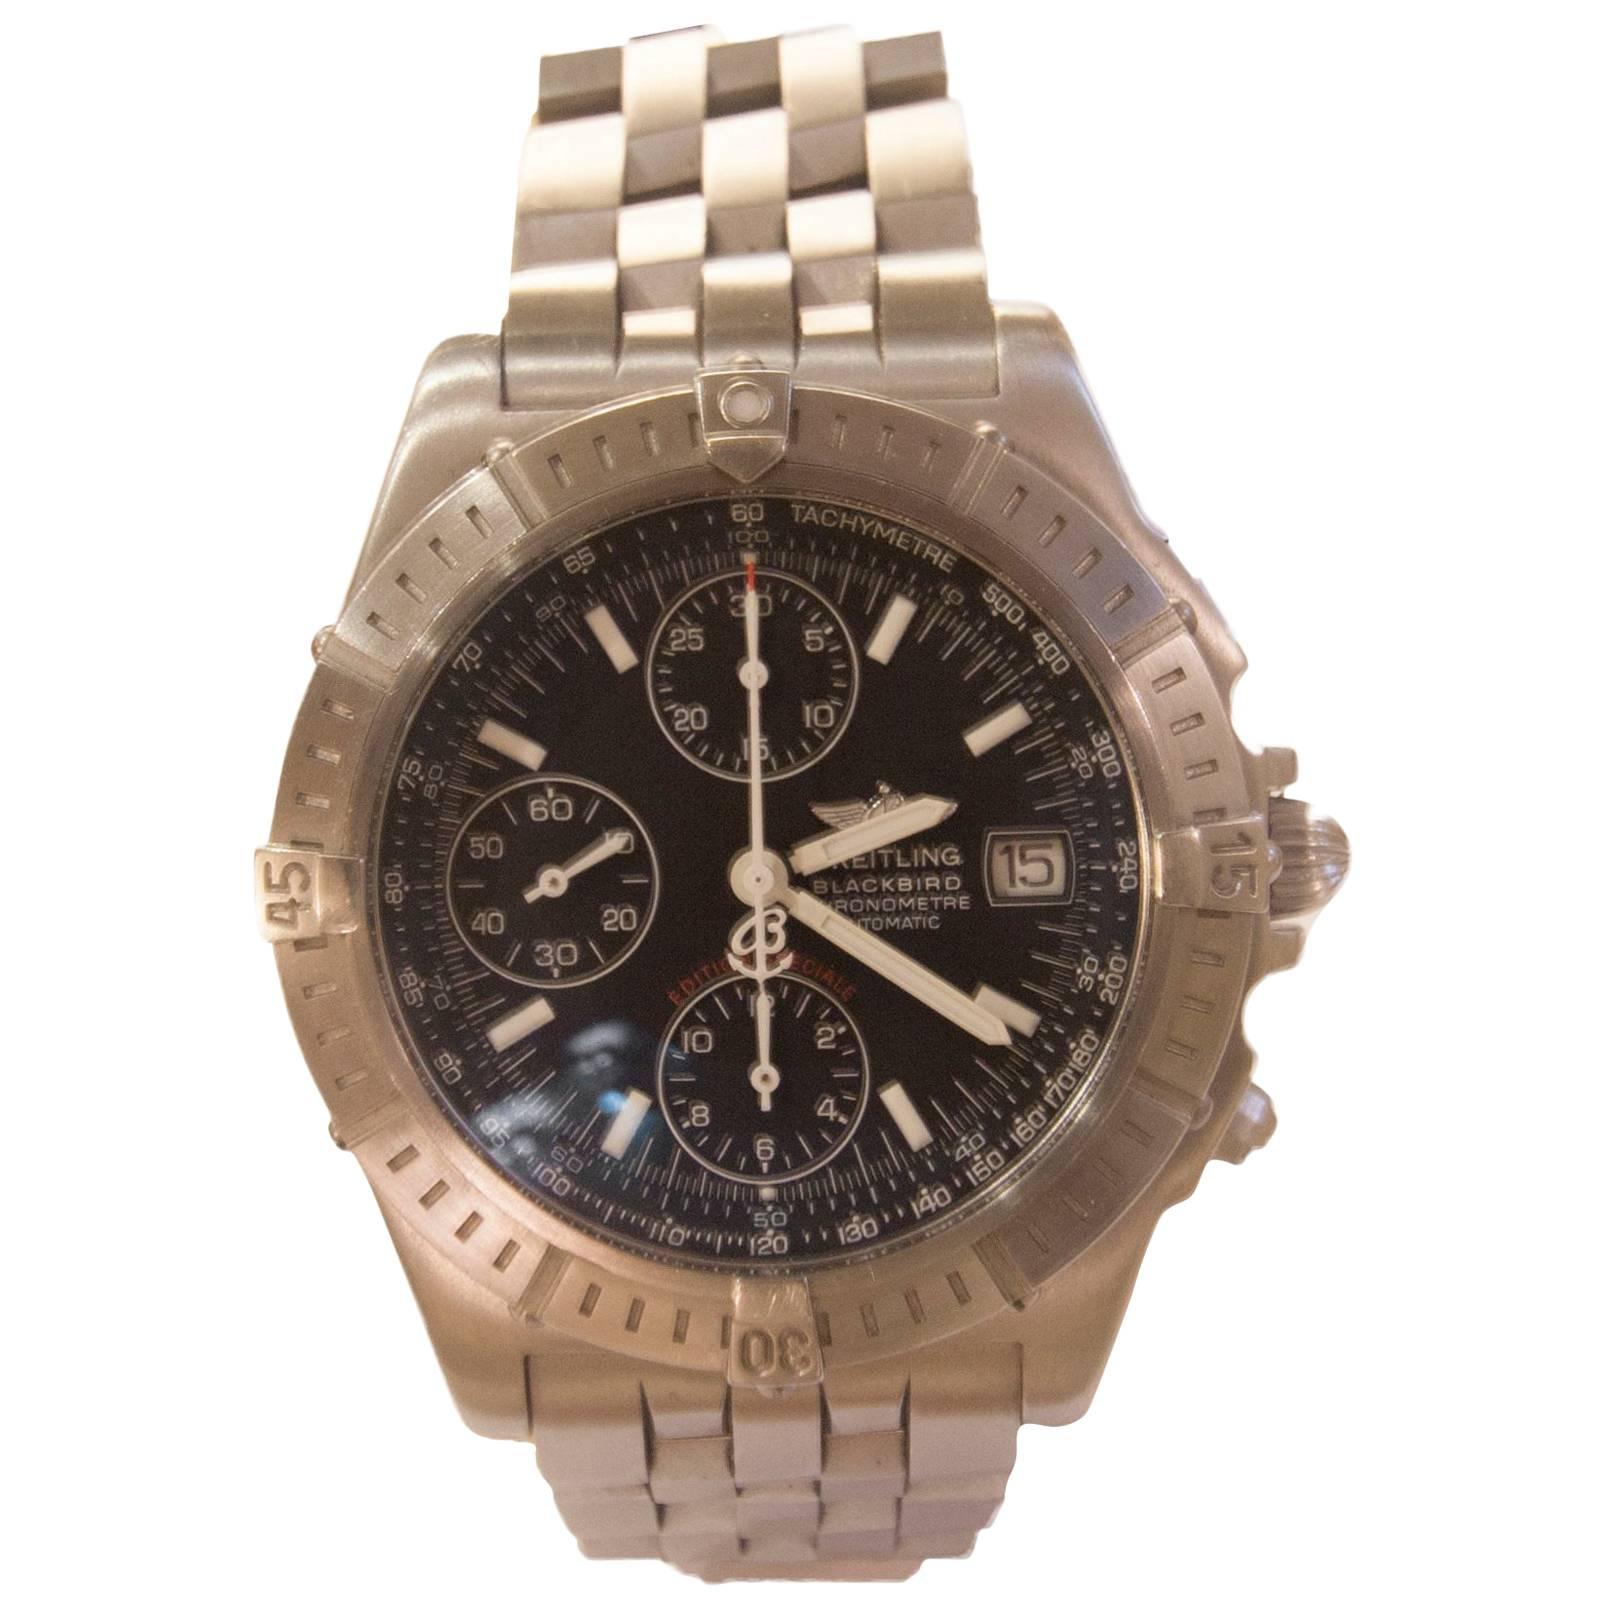 Breitling A13353 Blackbird Stainless Steel Chronograph Special Edition Watch For Sale